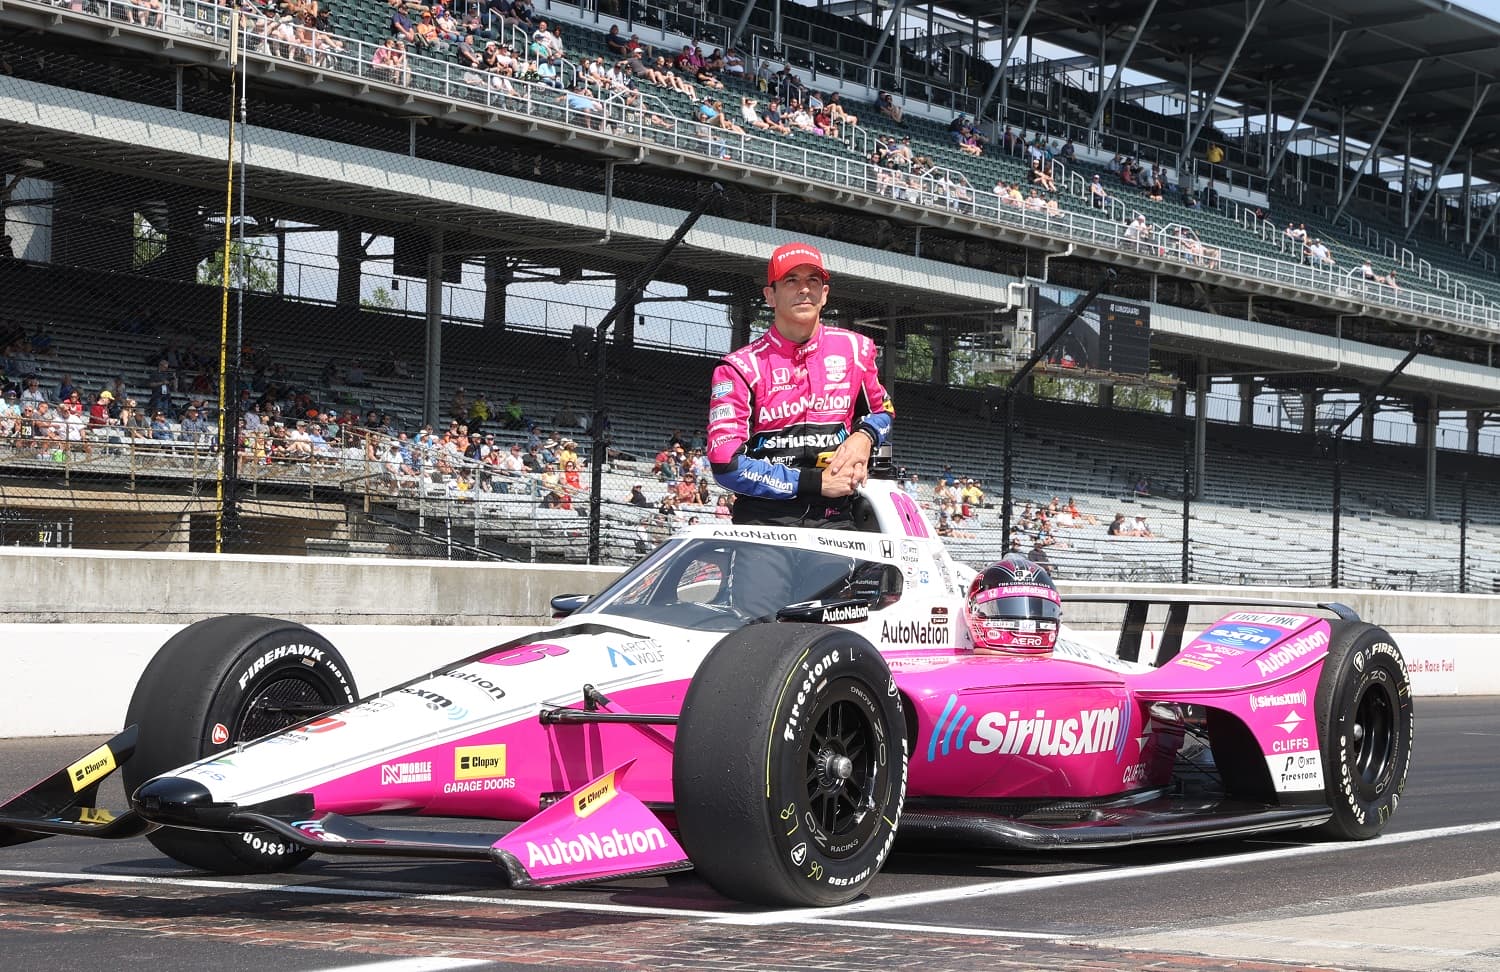 NTT IndyCar series driver Helio Castroneves poses for his official photo at the yard of bricks after qualifying for the 107th Indianapolis 500 on May 20, 2023. | Brian Spurlock/Icon Sportswire via Getty Images